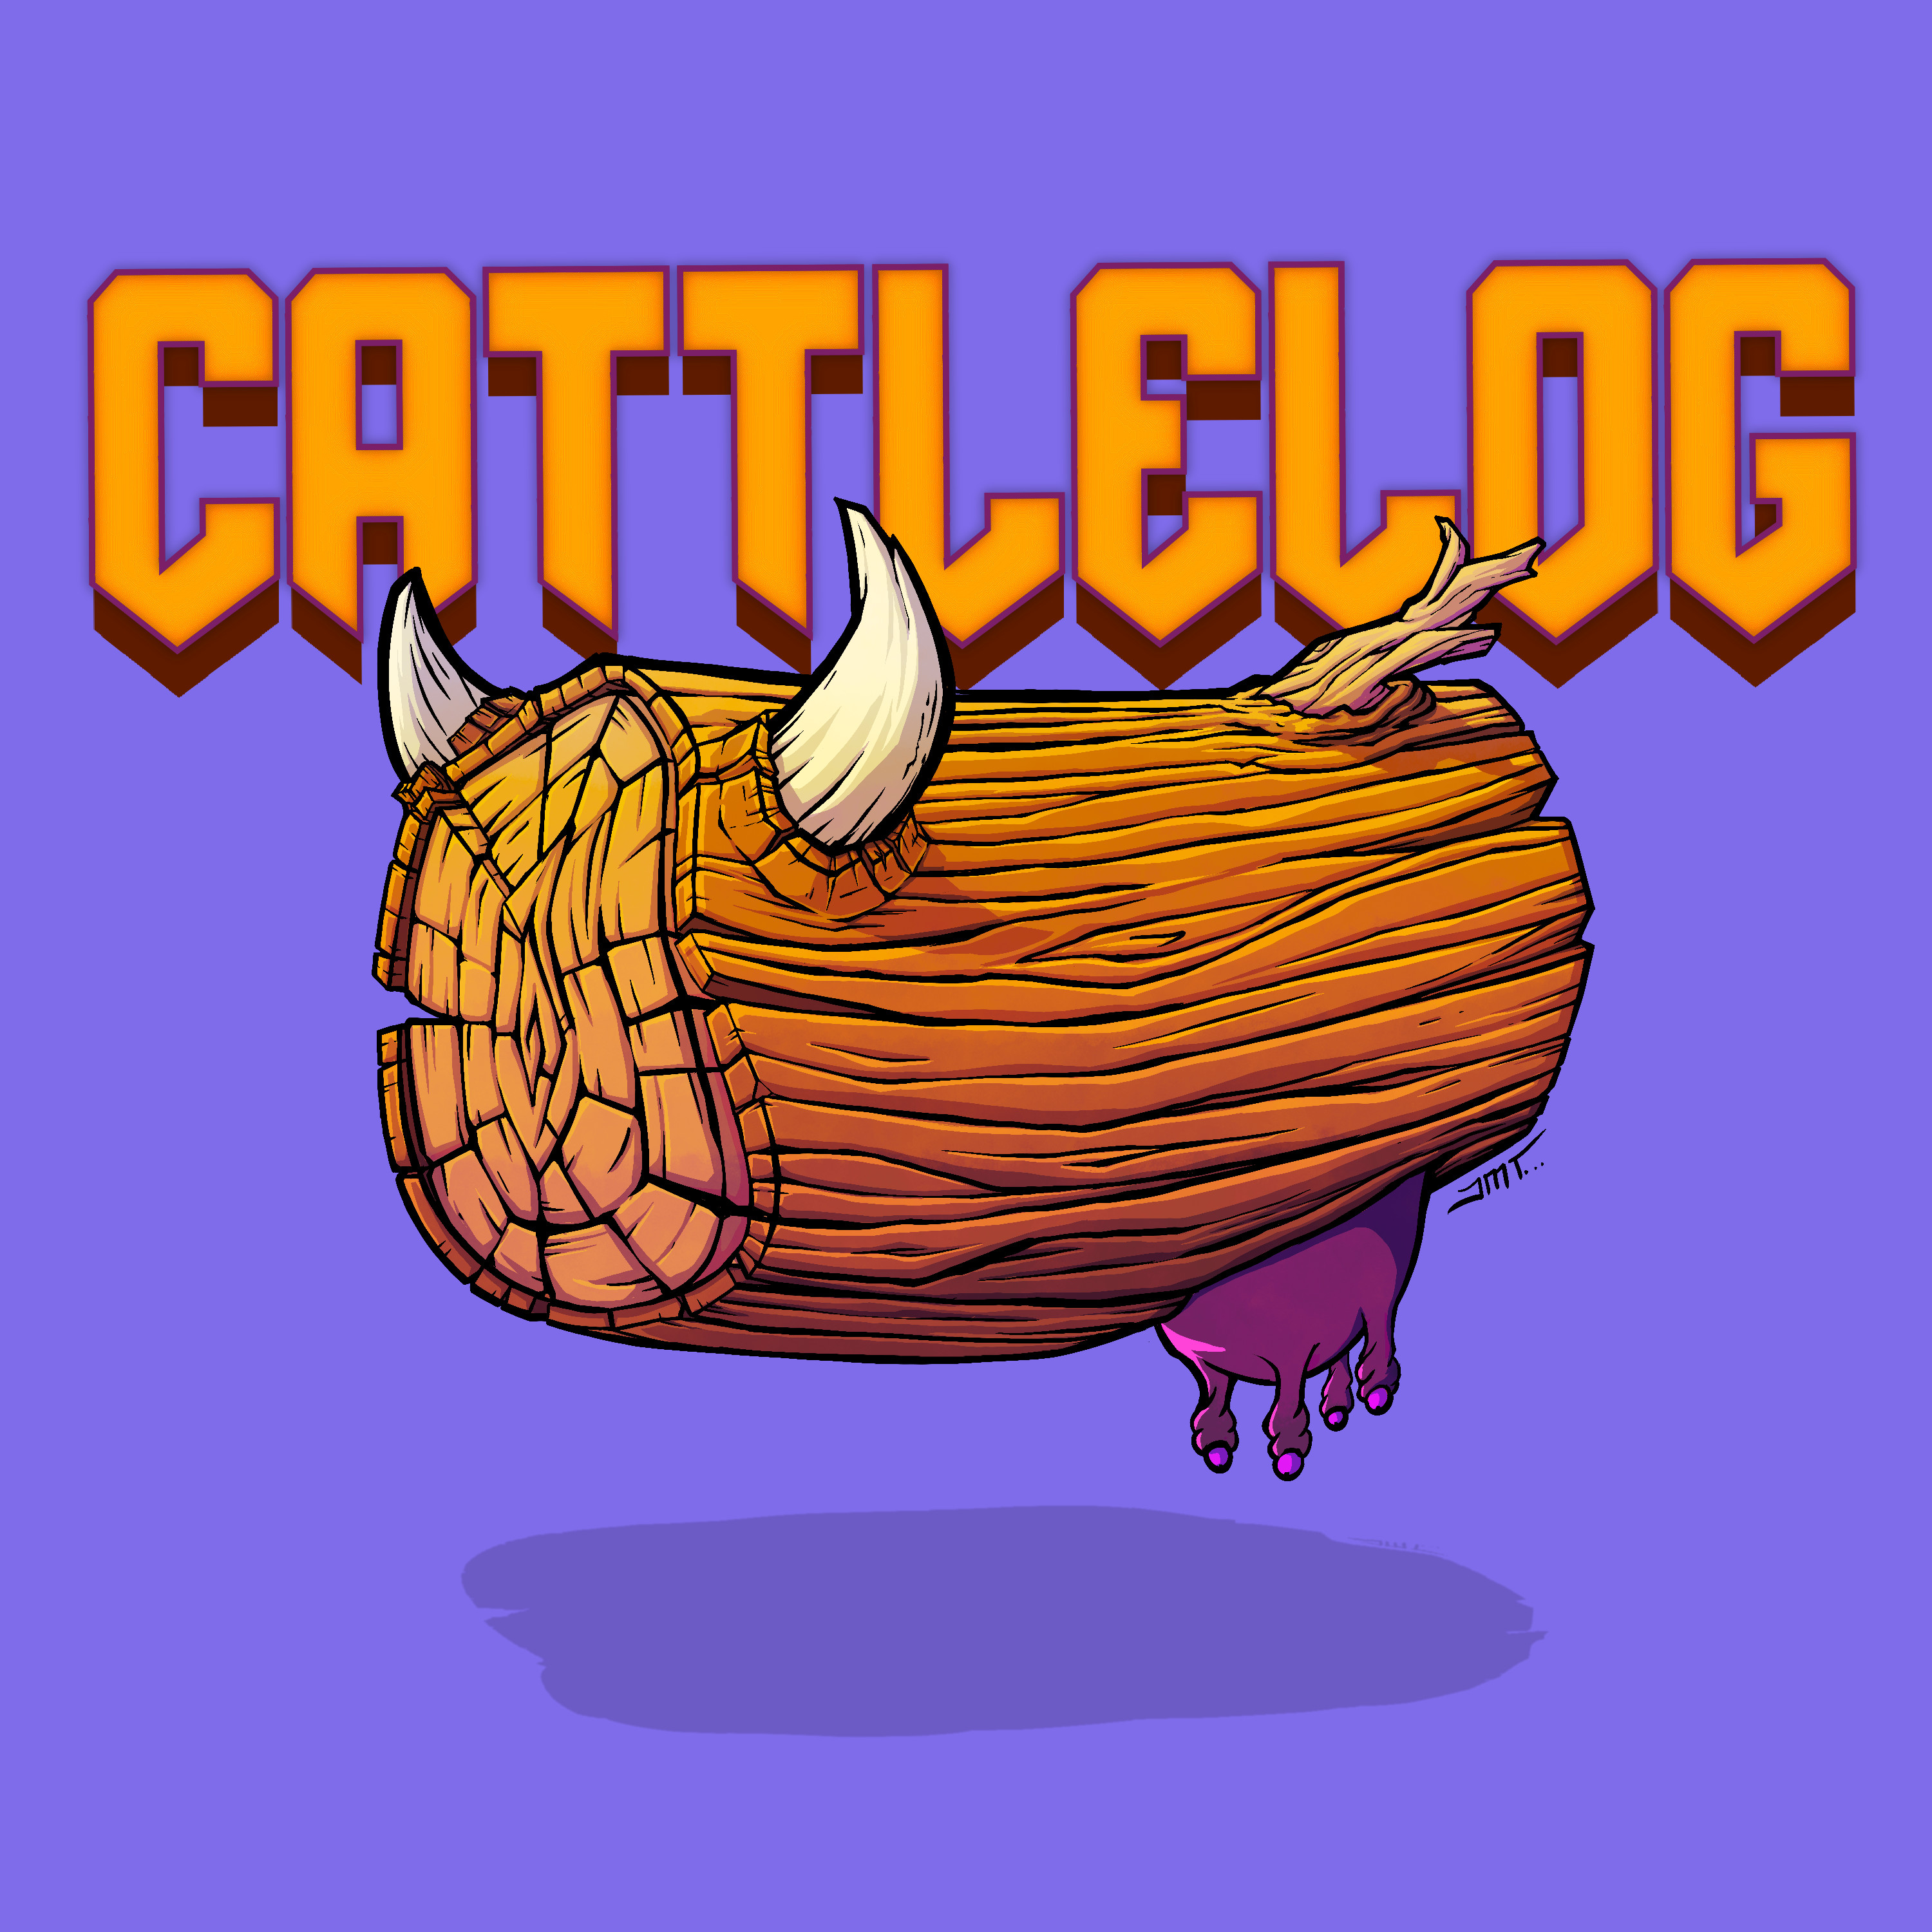 Cattlelog: This demonically possessed 🪵 is cursed to take your late night, retail therapy orders for all eternity. You can't buy the cow, and the milk isn't free. 